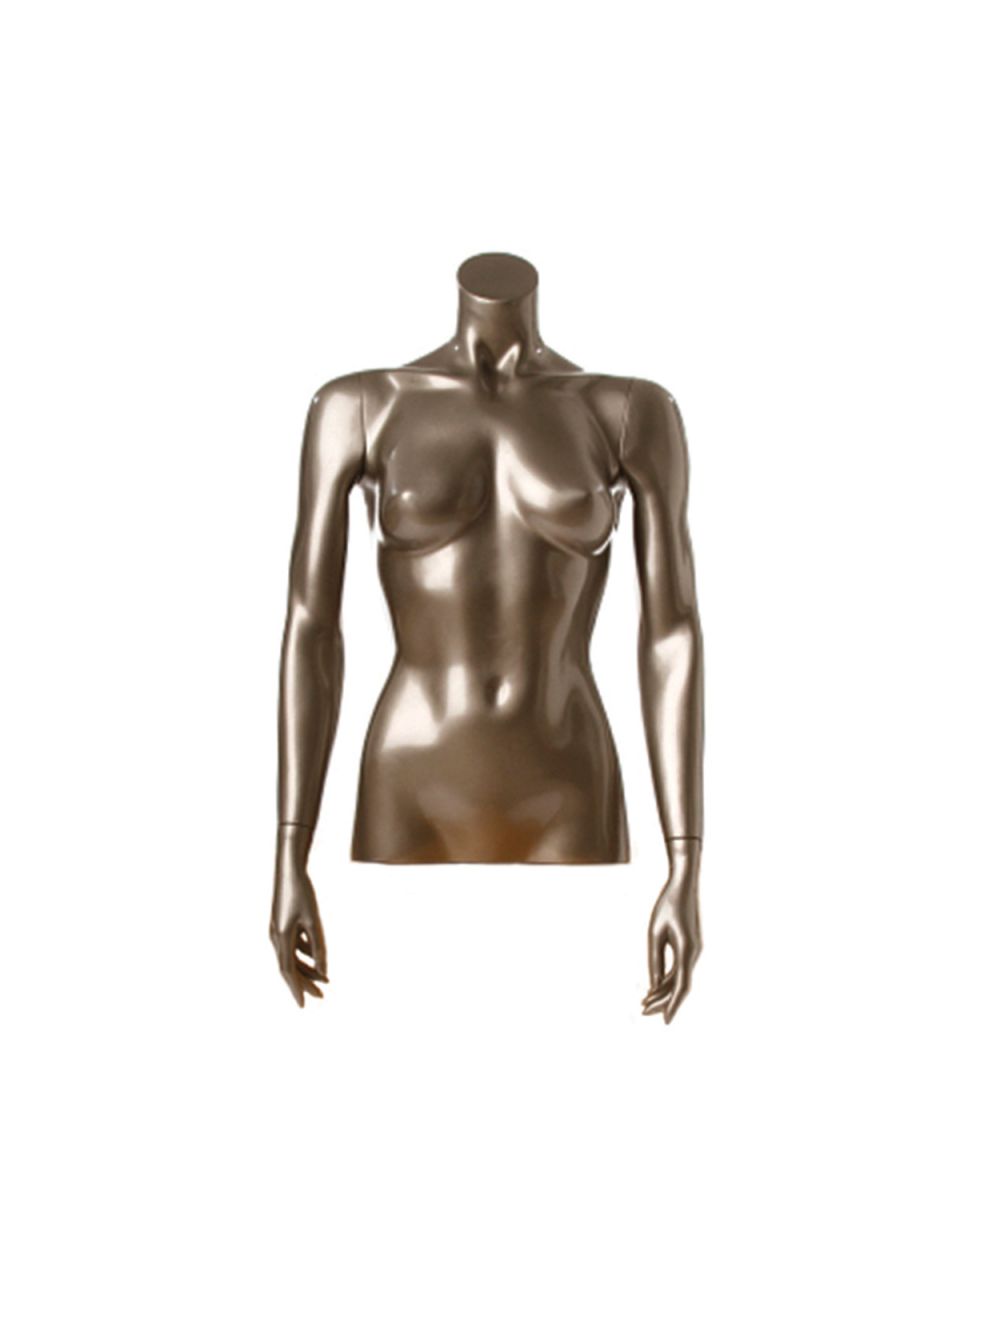 1/2 FEMALE W/ARMS Female MANNEQUIN for sale on discount